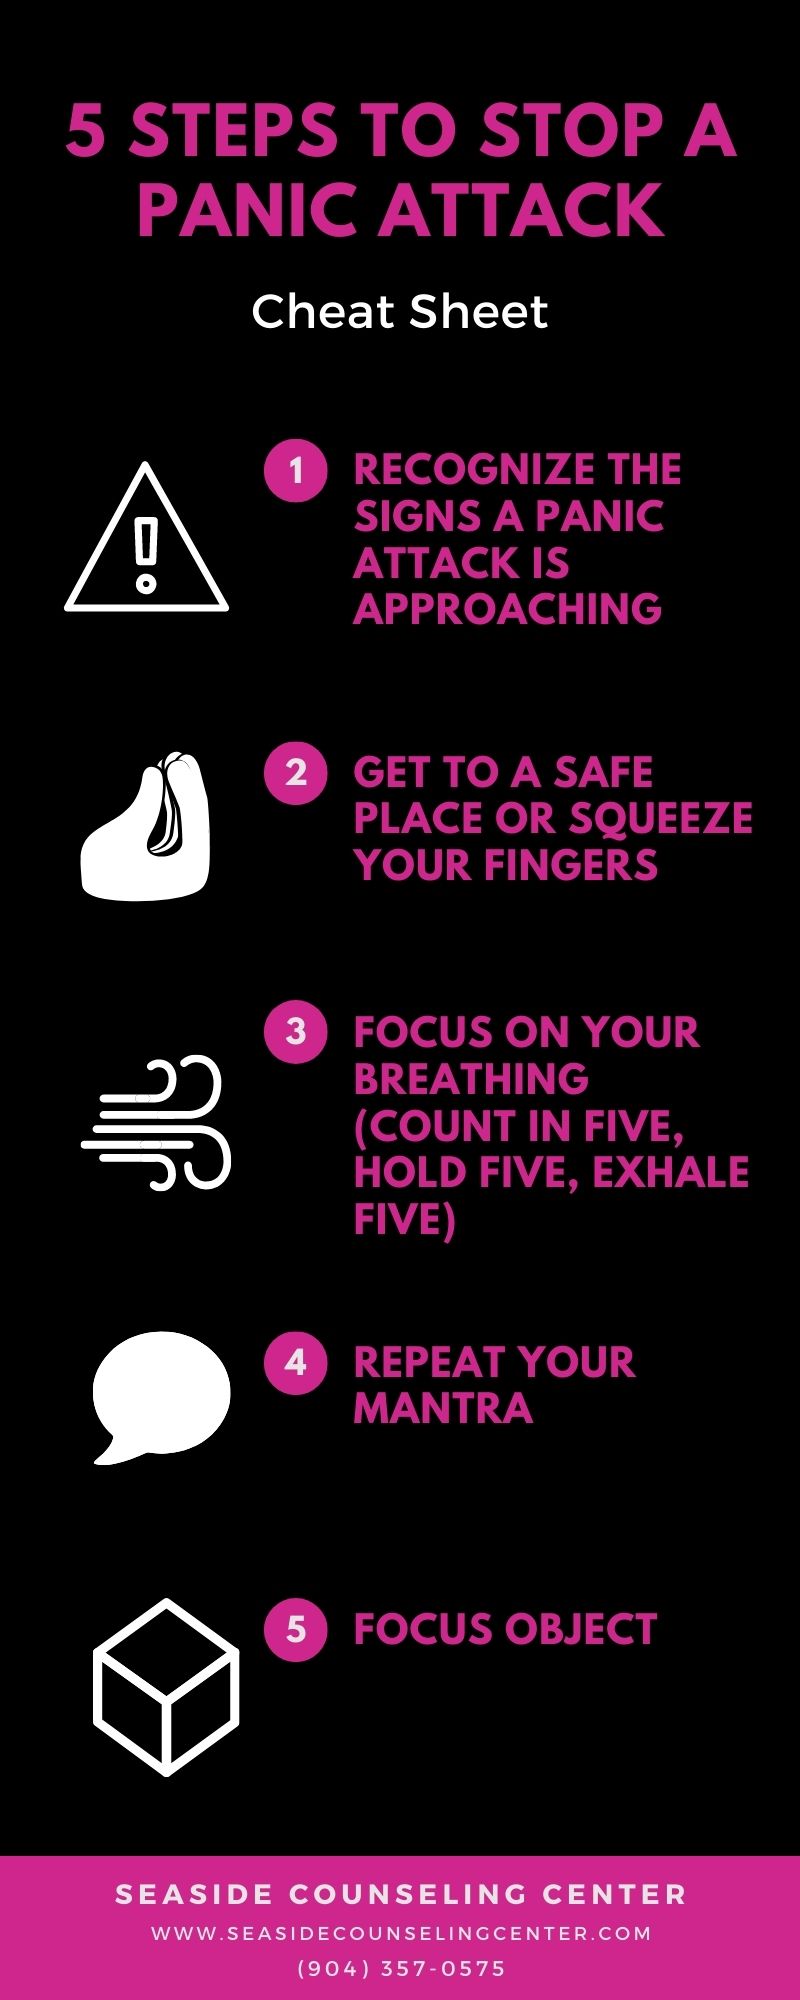 5 Steps To Stop Panic Attack Cheat Sheet 